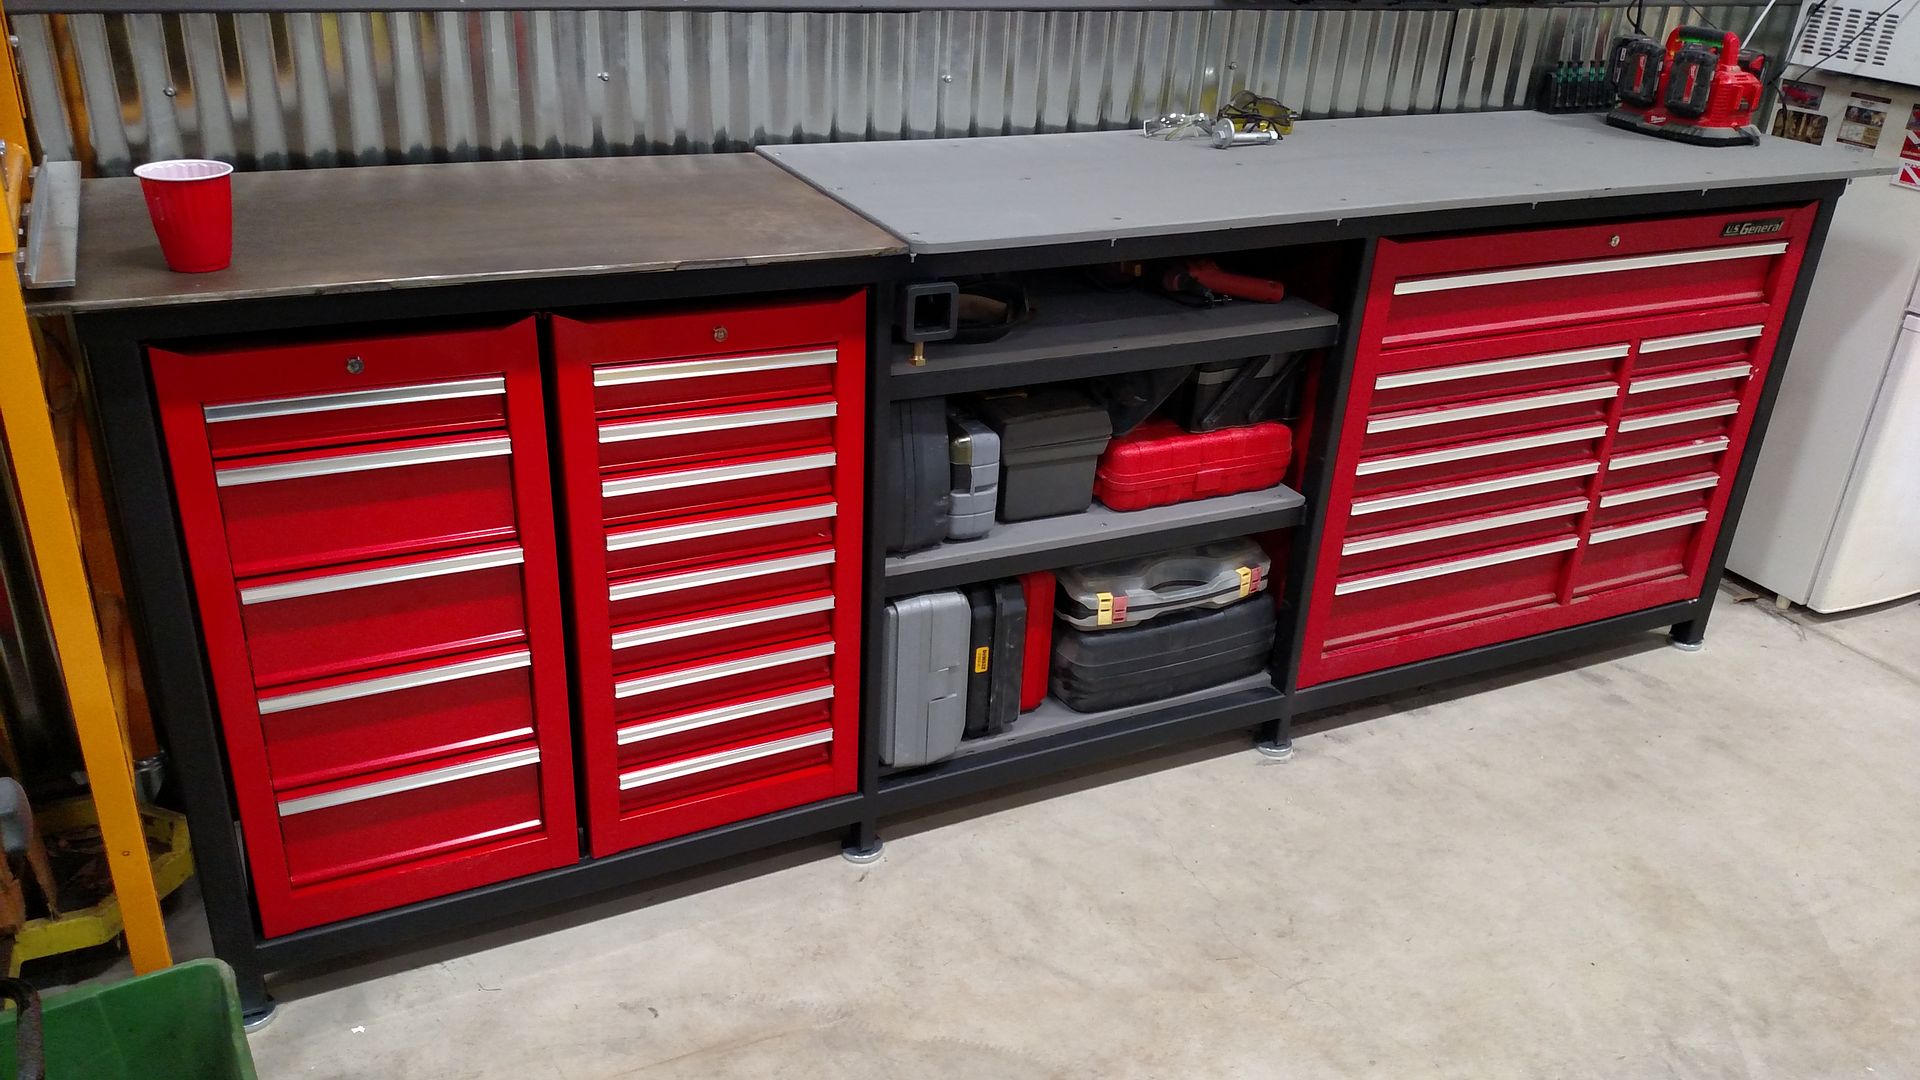 Image 65 of Harbor Freight Tool Chest Workbench